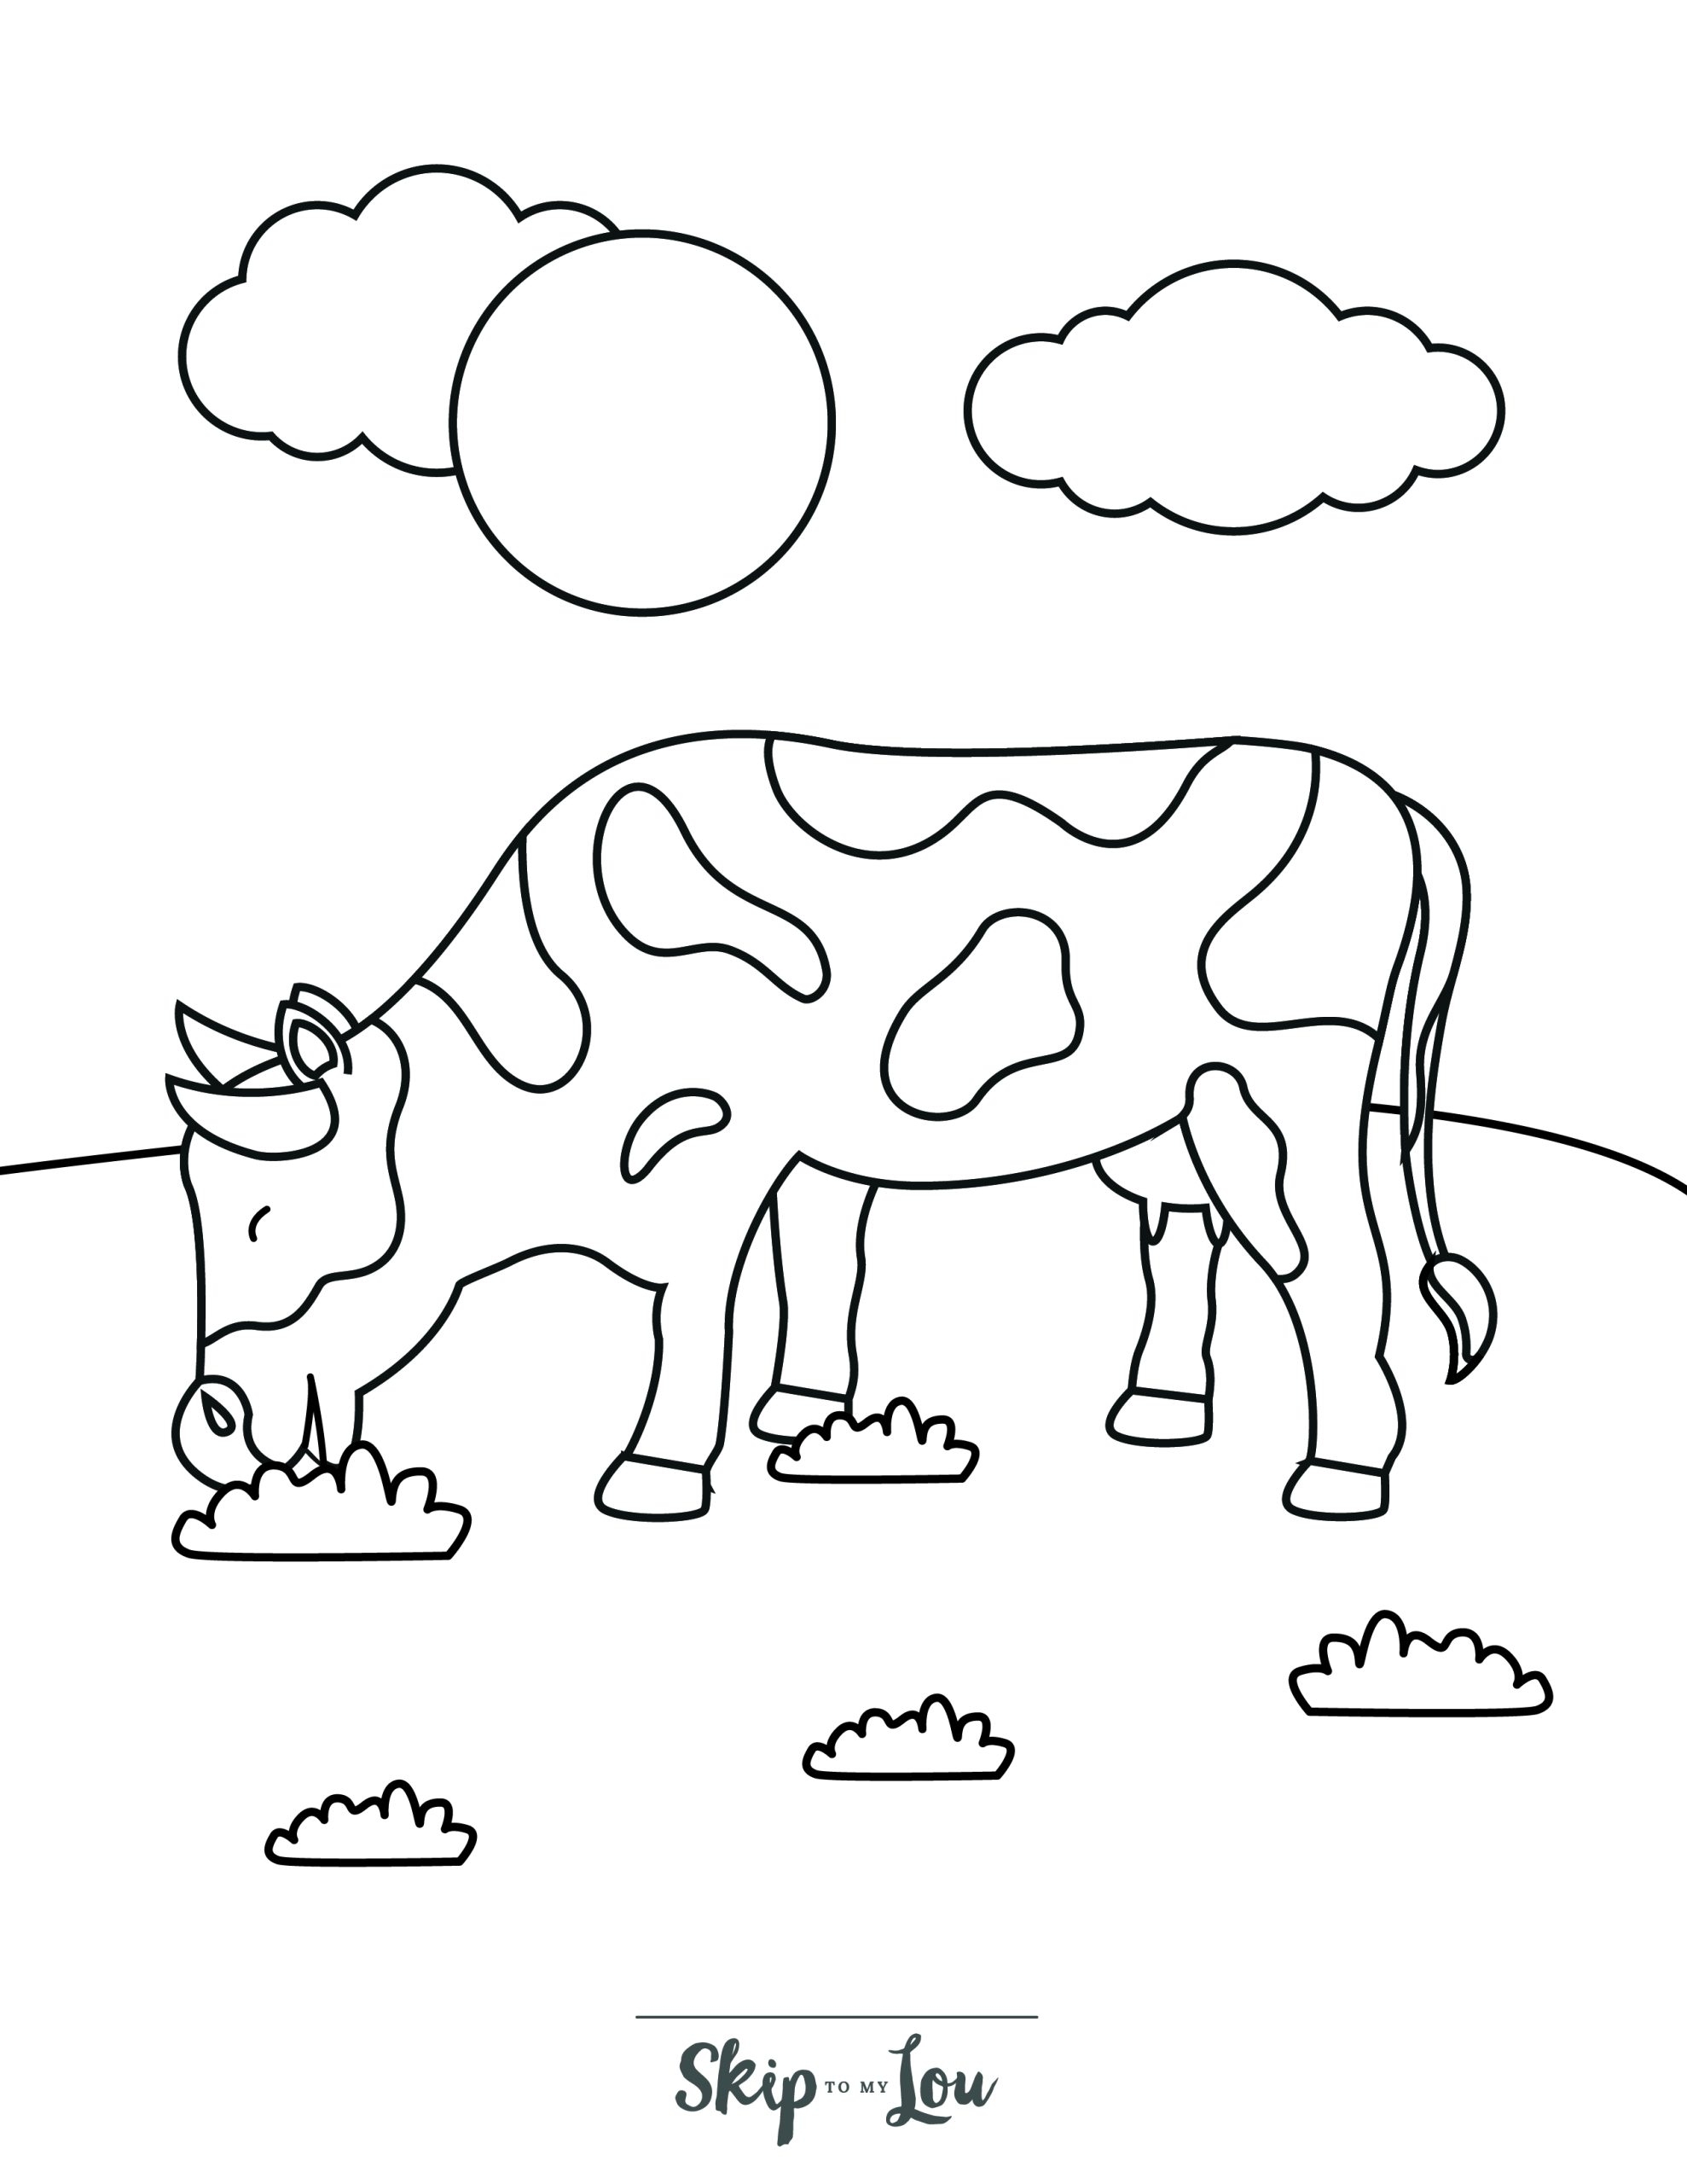 Free Printable Cow Coloring Pages With PDF Download Skip To My Lou - Coloring Pages of Cows Free Printable